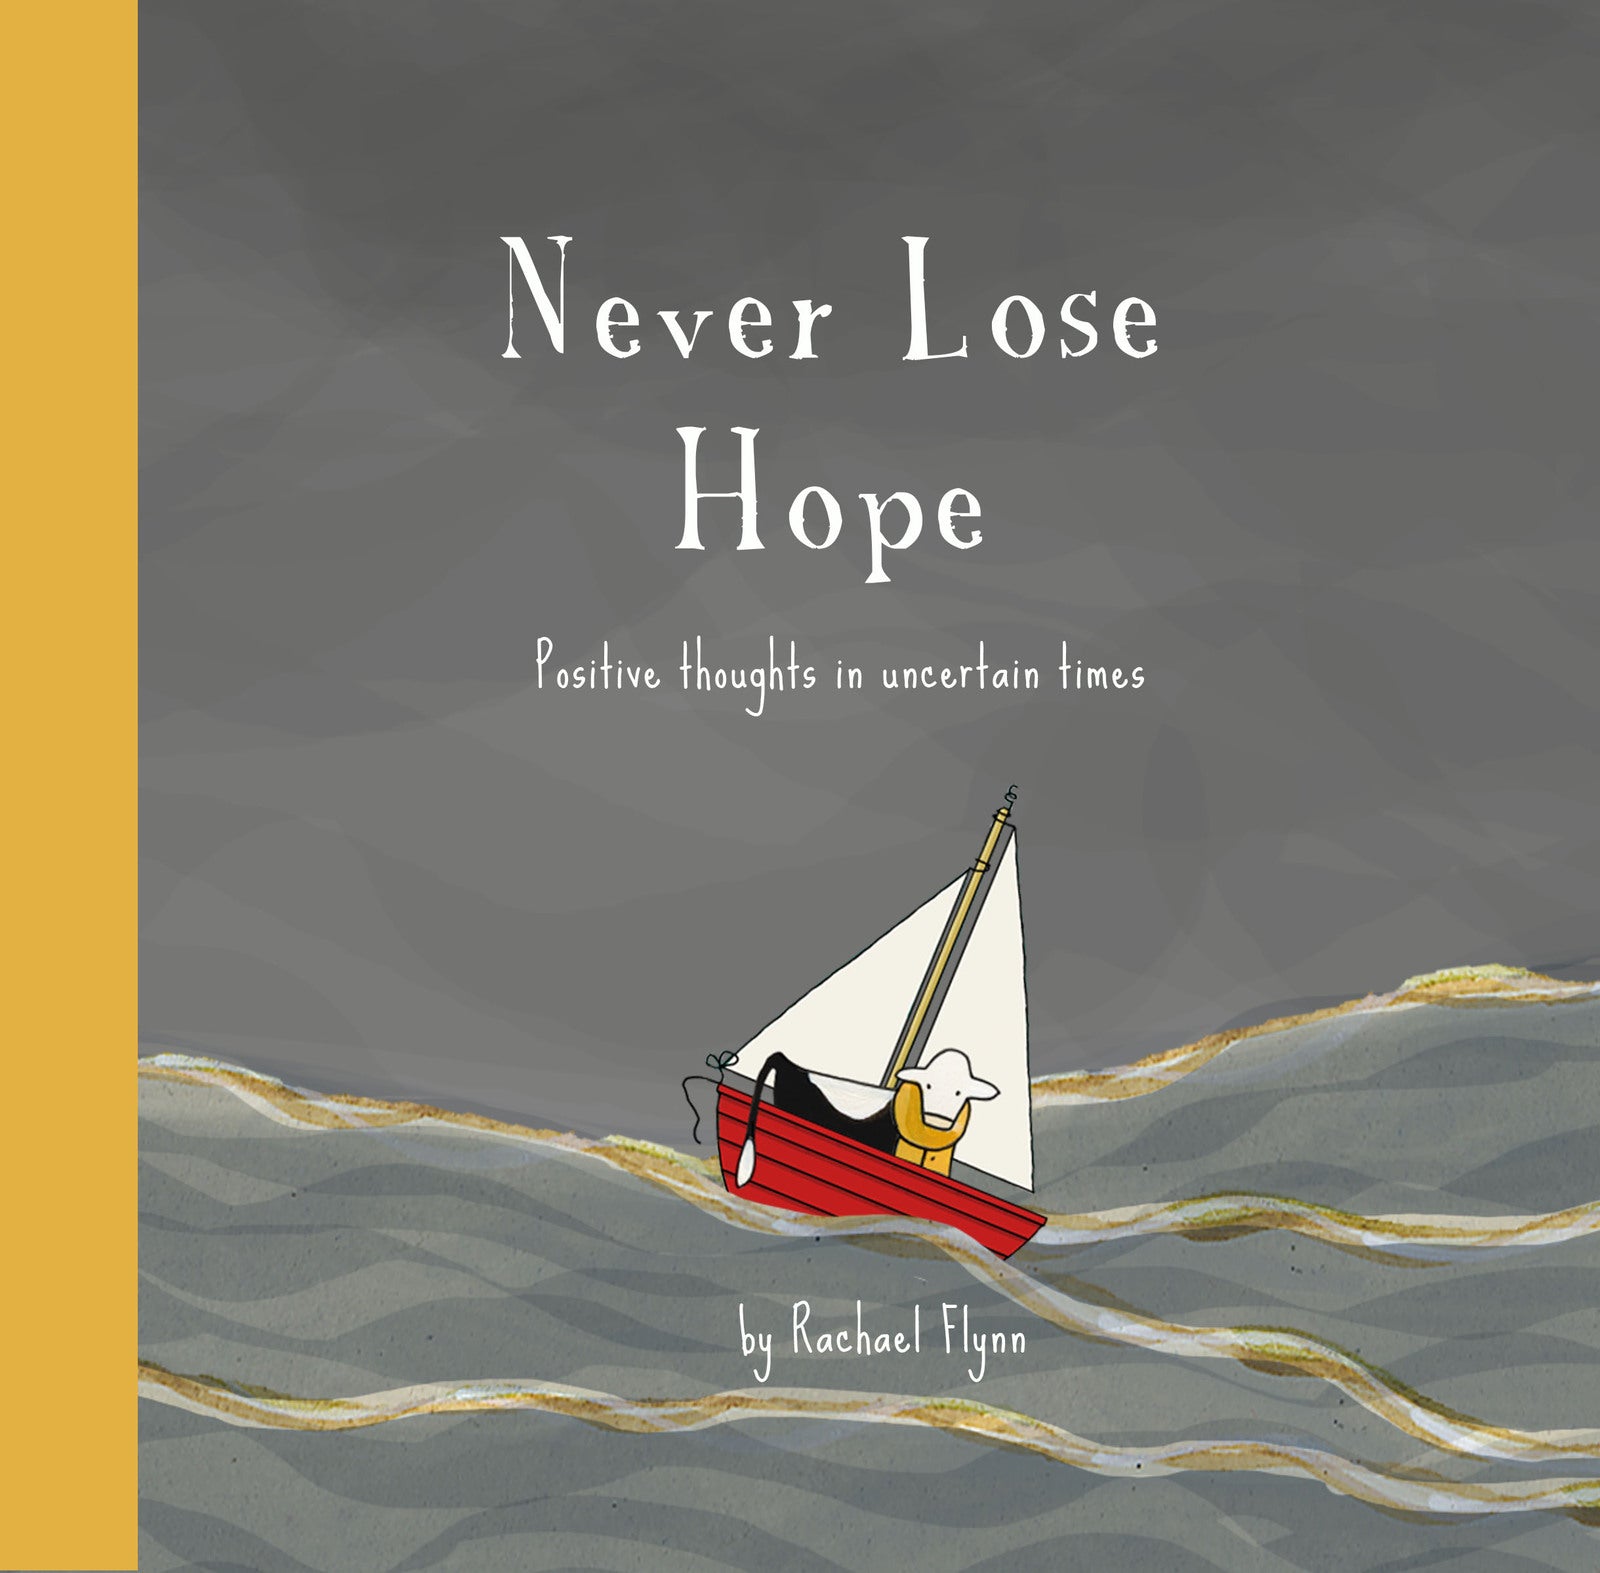 Mill & Hide - Red Tractor Designs - Never Lose Hope